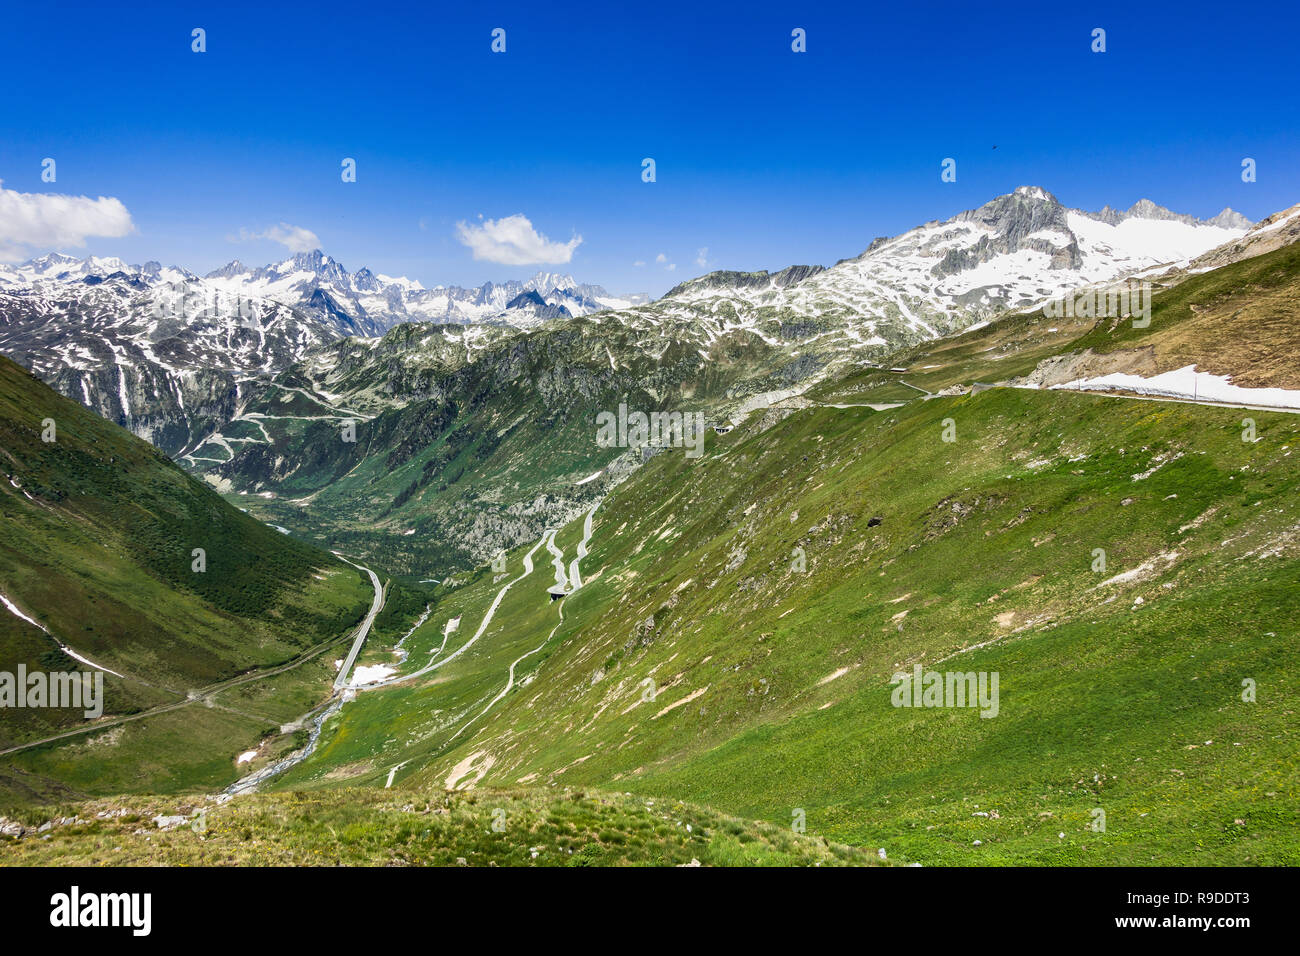 Summer landscape from Furka pass with the serpentine road climbing up the Rhone Valley and the Rhone Glacier on the right, Valais, Switzerland Stock Photo